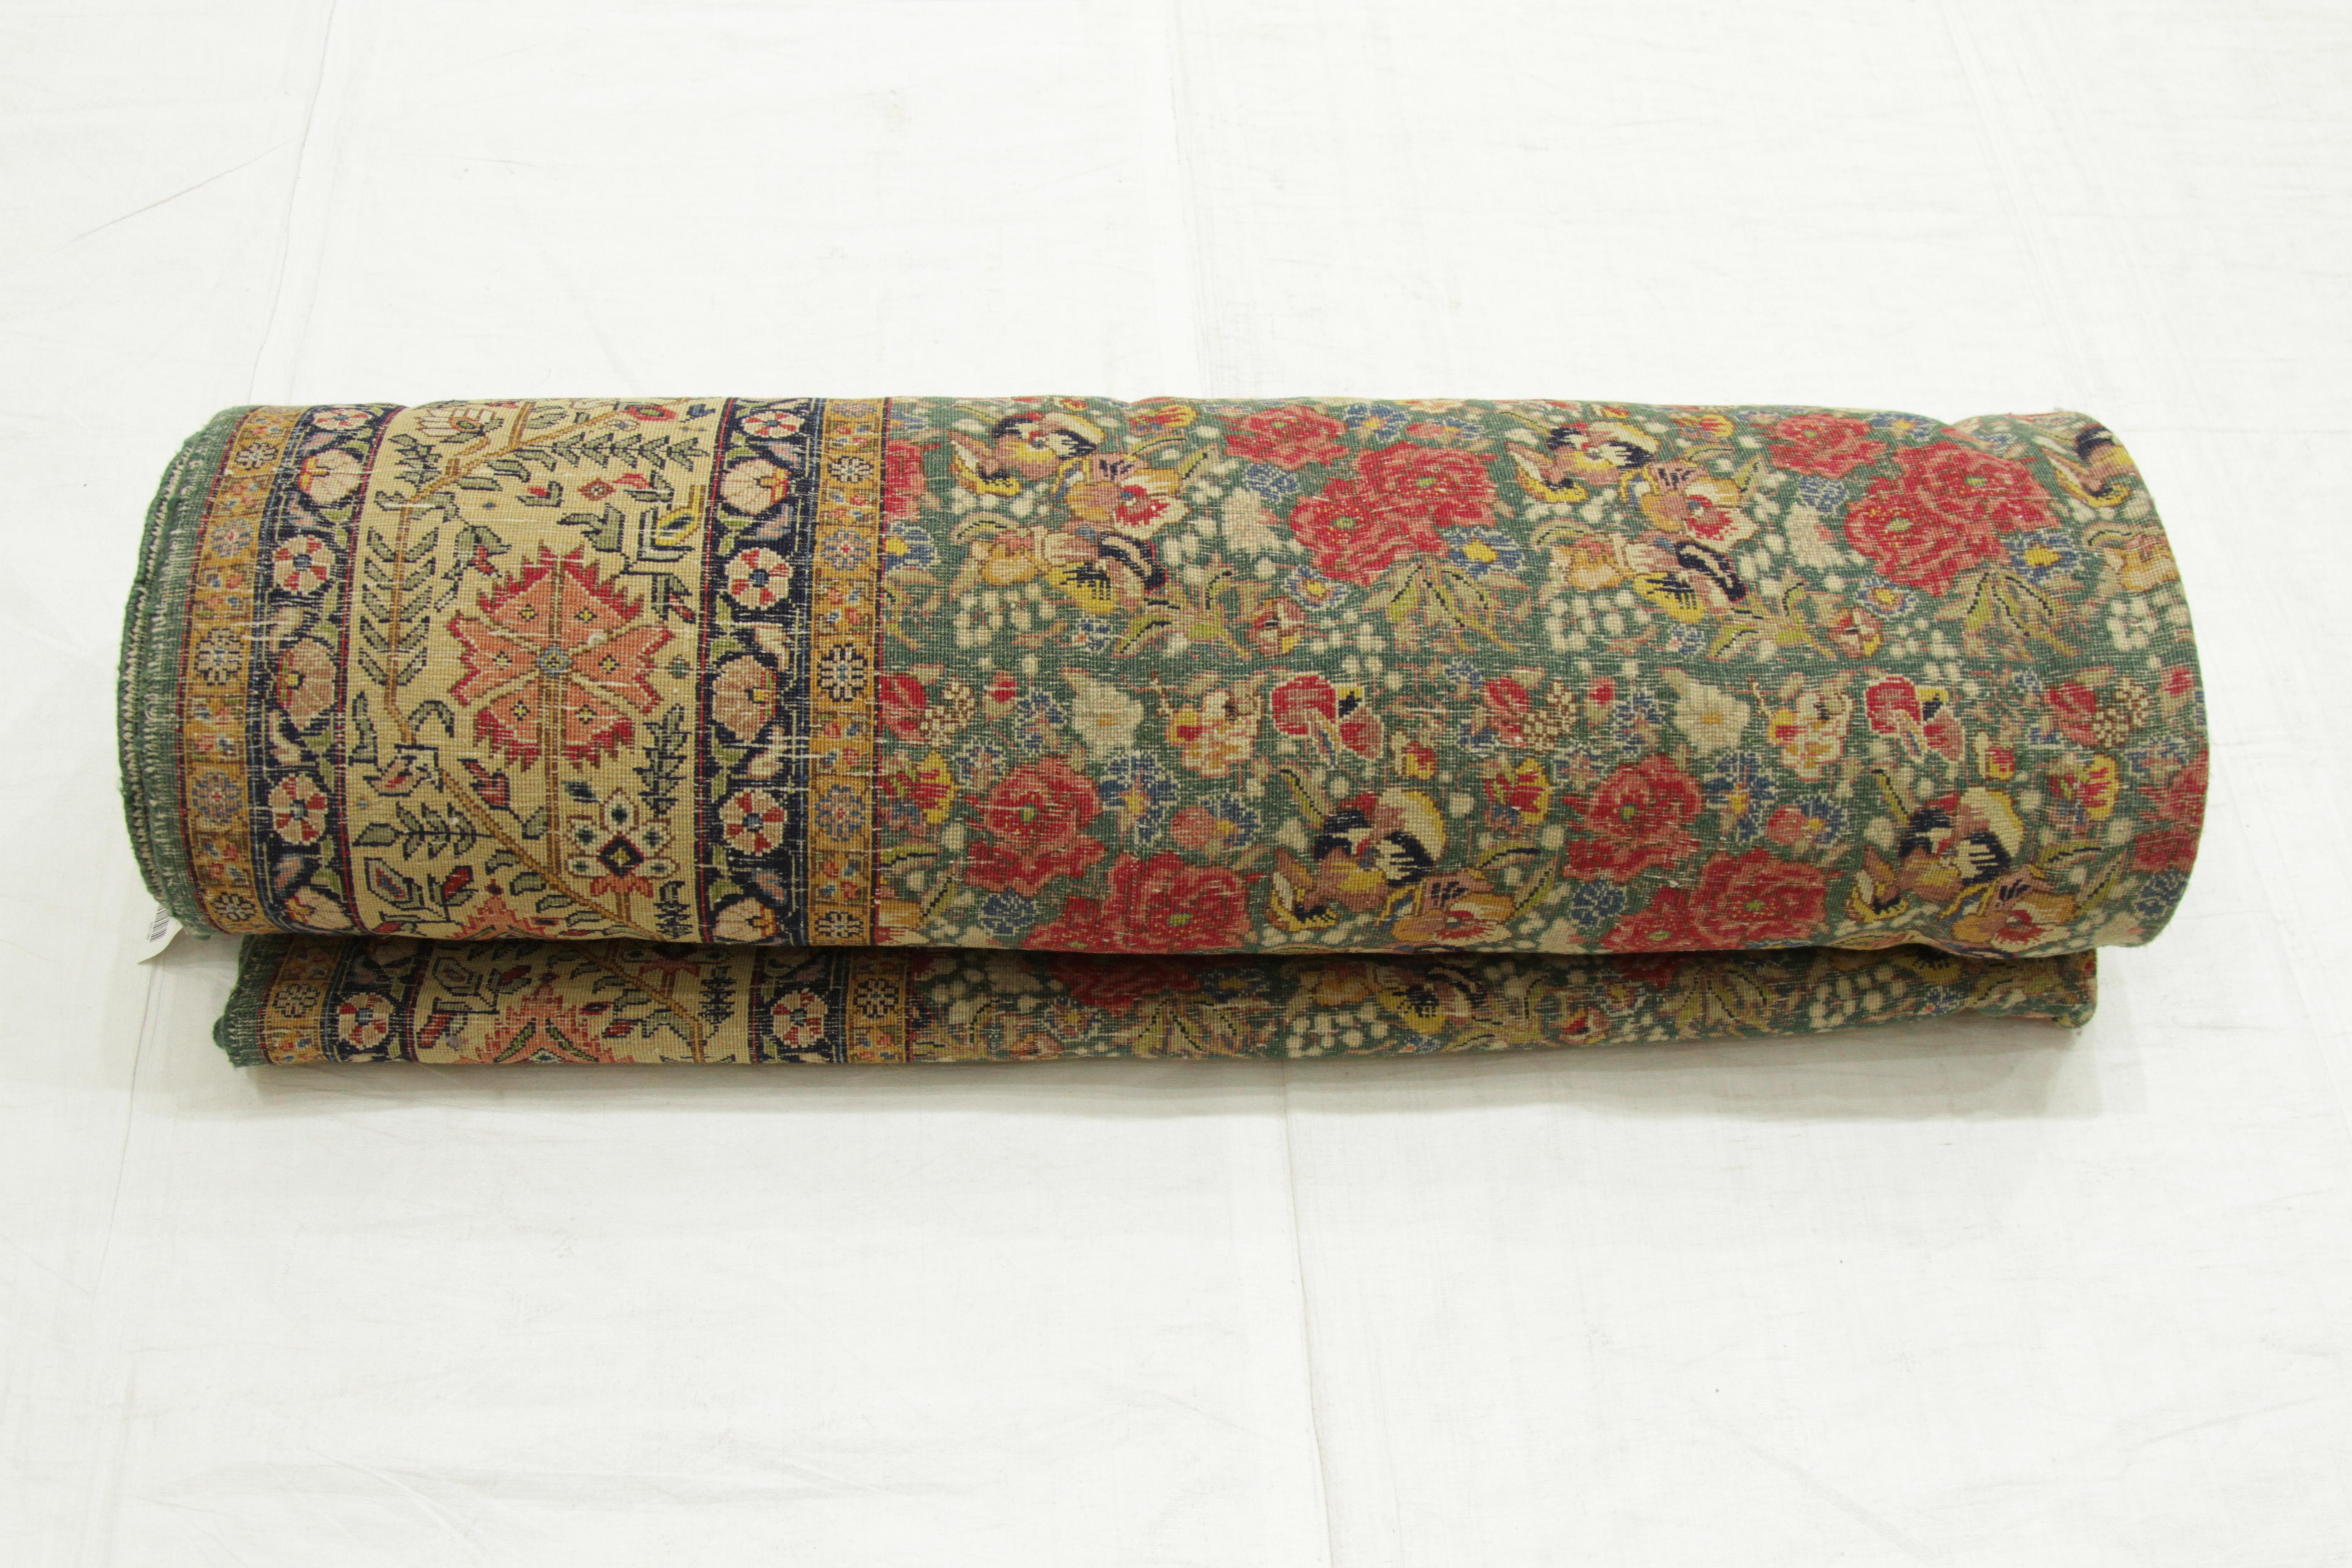 1950s Antique Persian Rug Tabriz Design with Gold and Red Field of Roses Pattern For Sale 6